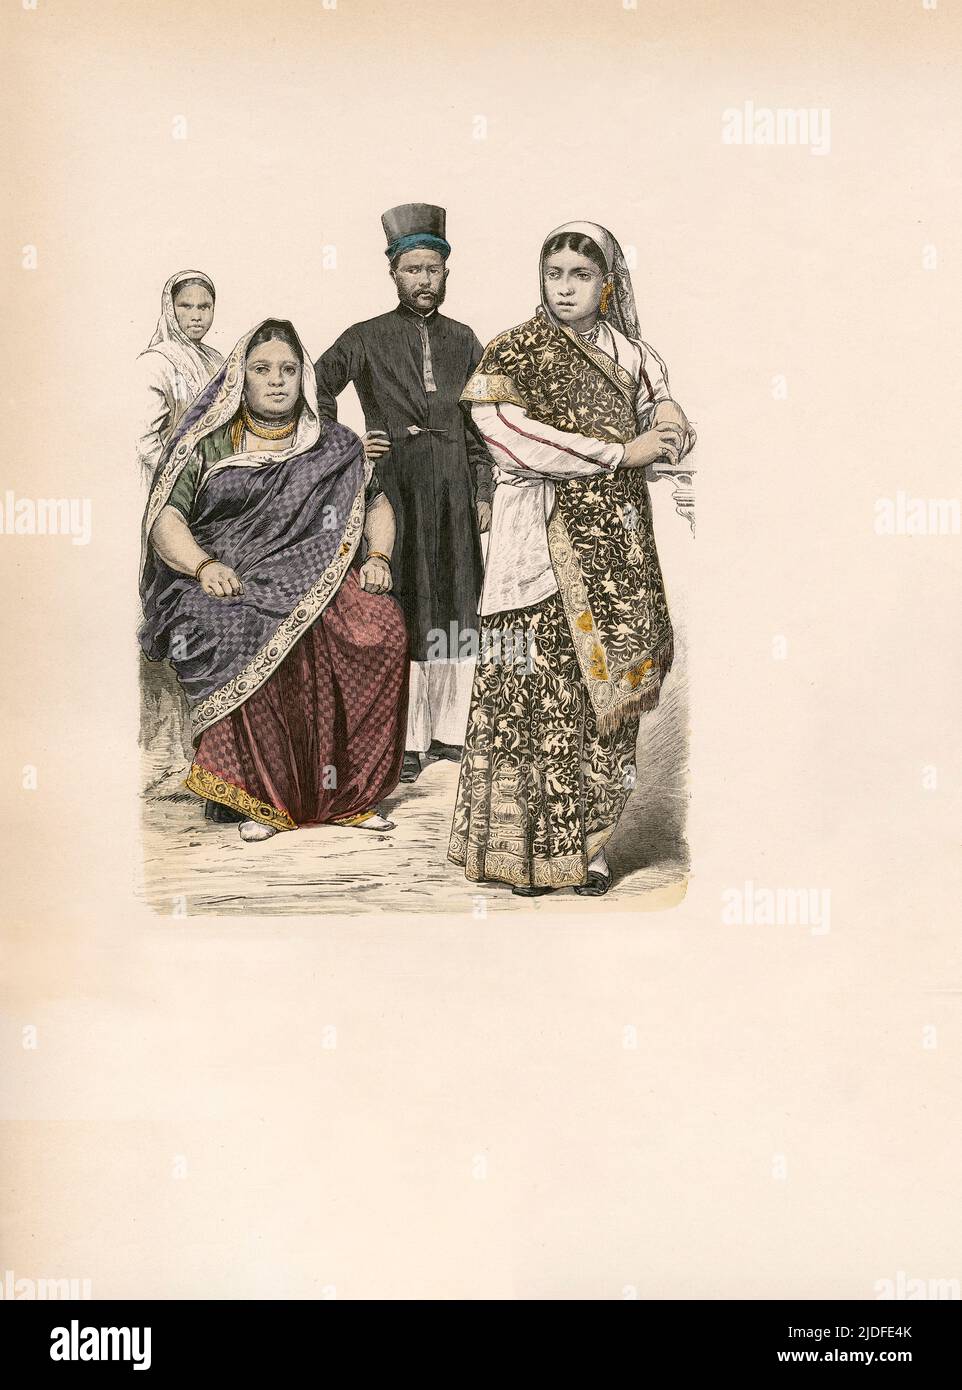 Parsees from Bombay and Singapore, Late 19th Century, Illustration, The History of Costume, Braun & Schneider, Munich, Germany, 1861-1880 Stock Photo